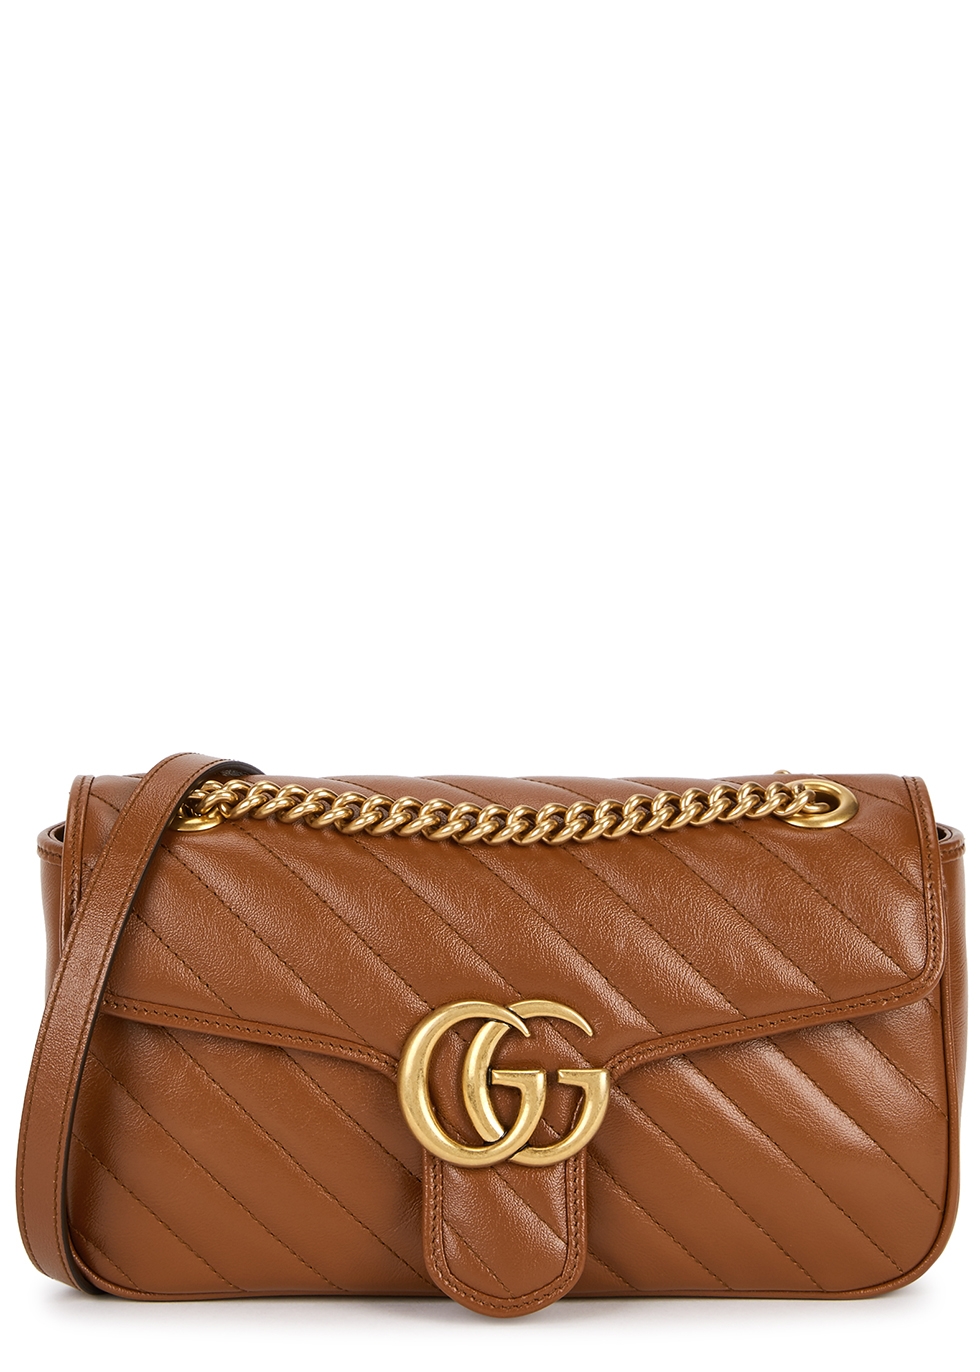 gucci marmont brown